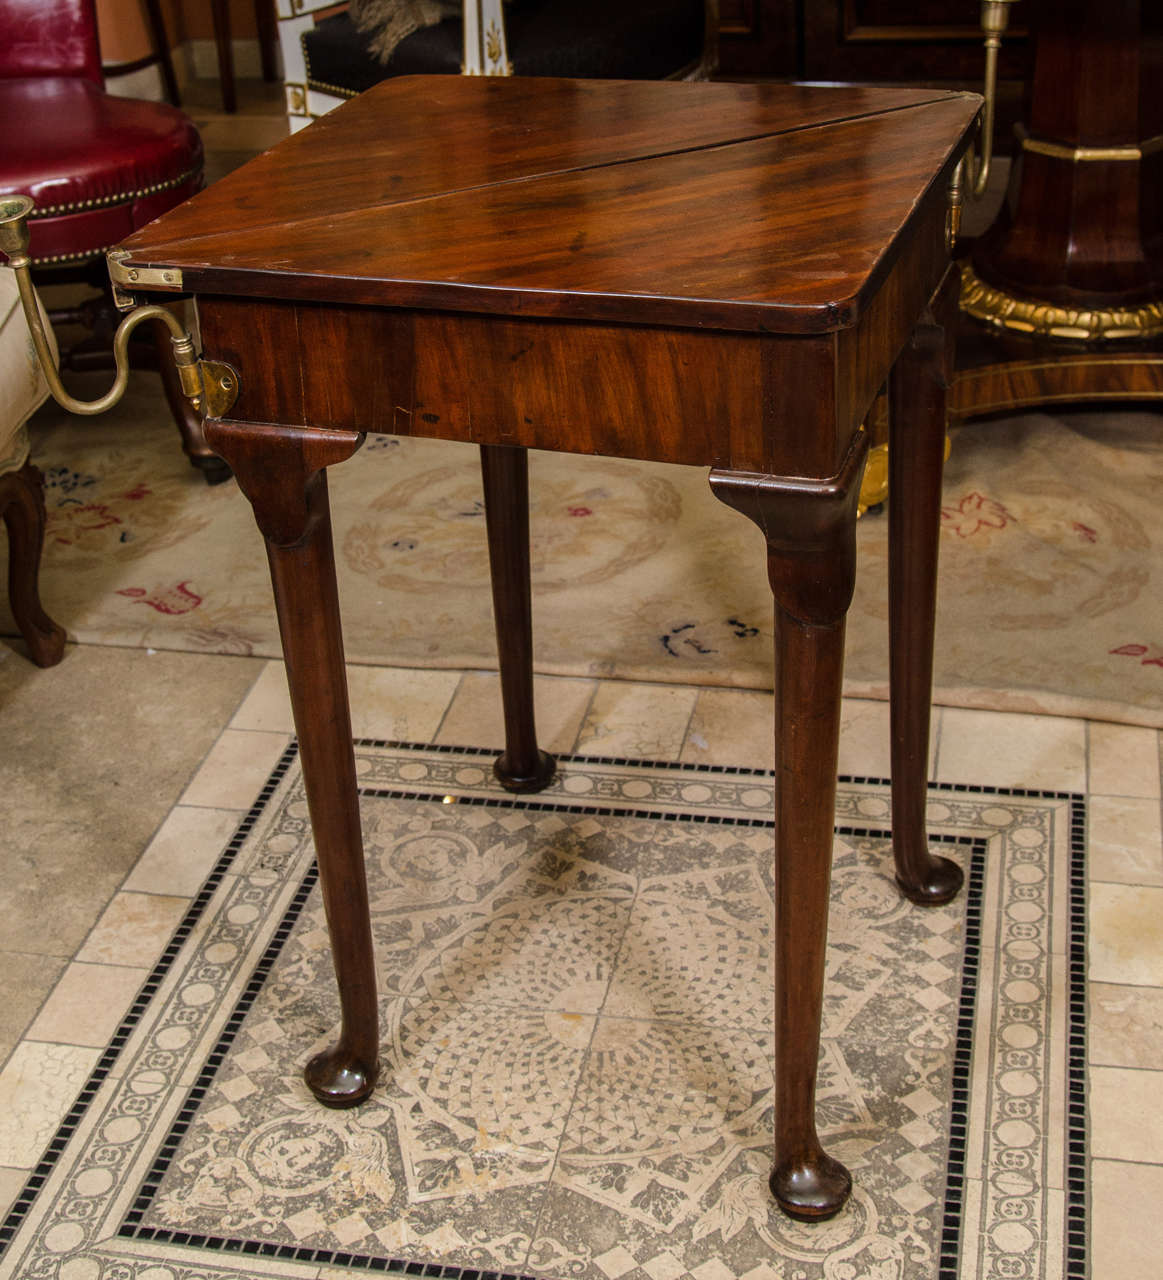 A Rare Queen Anne mahogany triangular triple top games table with brass candle holders, and fitted interiors.